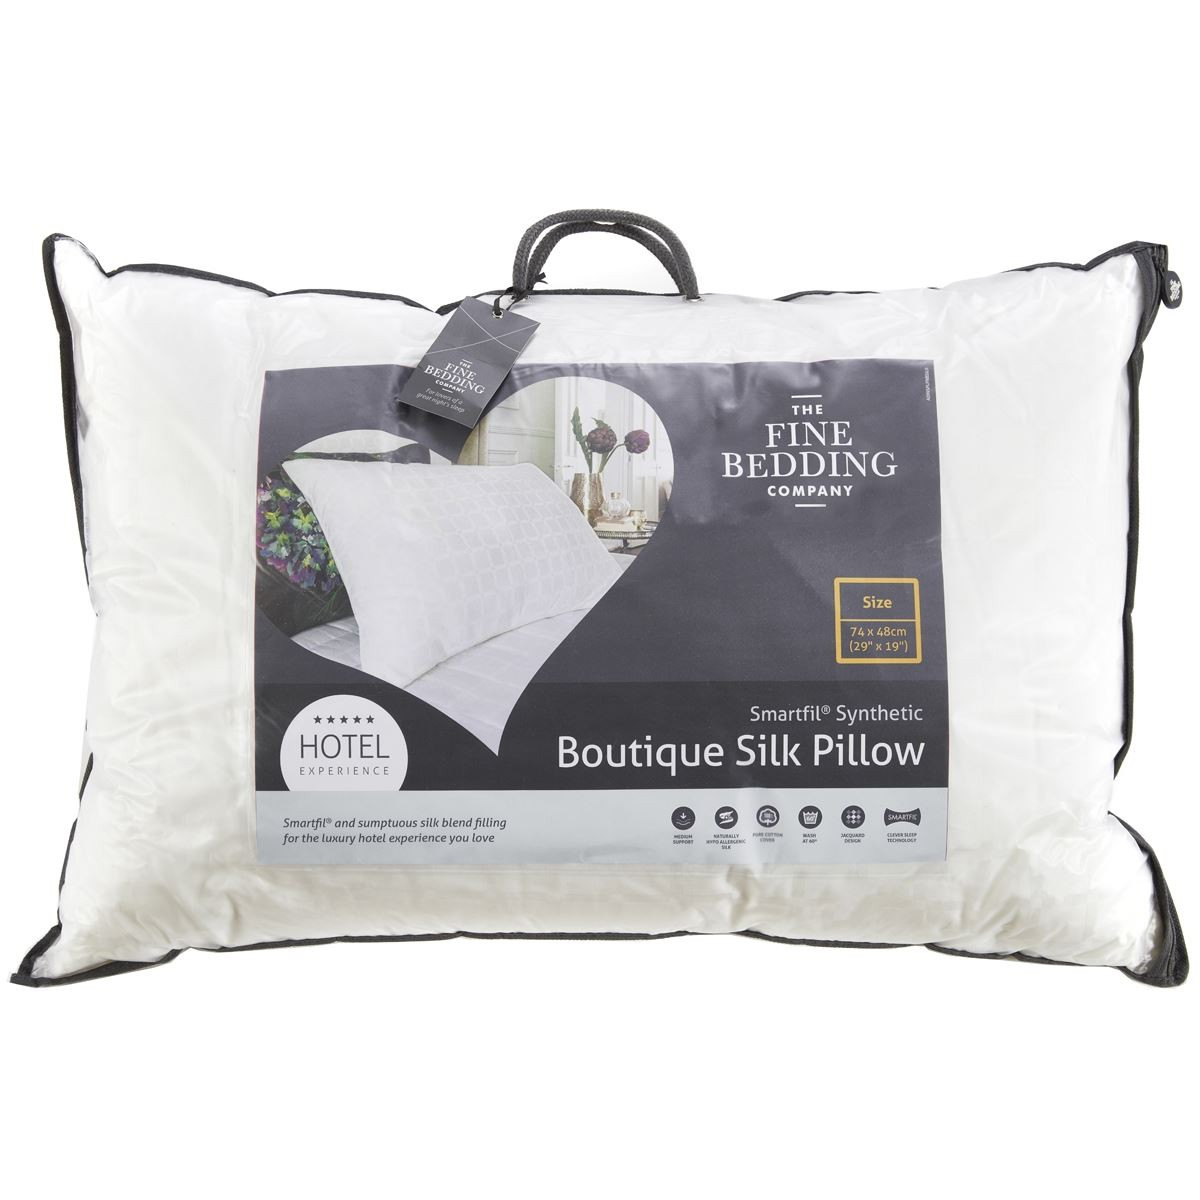 Image of The Fine Bedding Company Boutique Silk Pillow